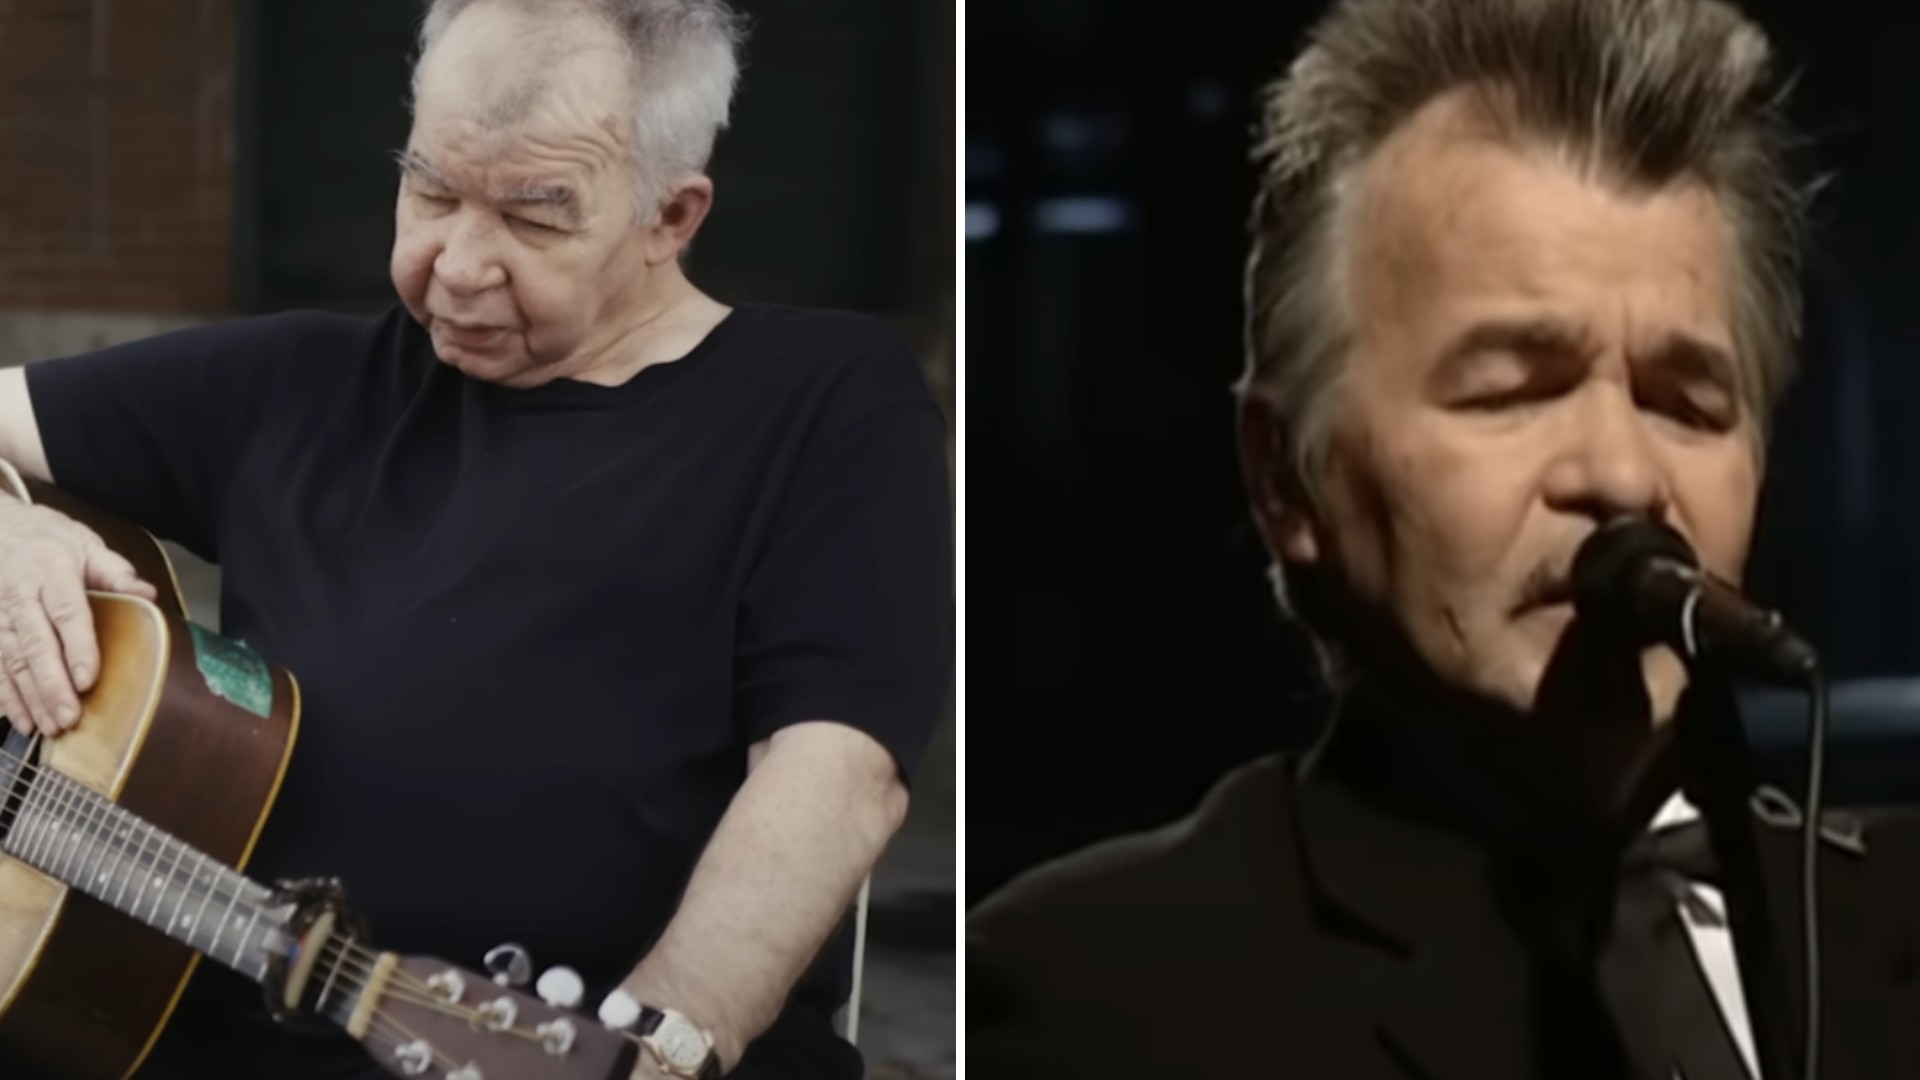 A split image shows the same older man in two different settings. On the left, he sits outdoors, holding an acoustic guitar and wearing a black shirt. On the right, he wears a suit and tie and is singing into a microphone on stage, eyes closed in concentration.